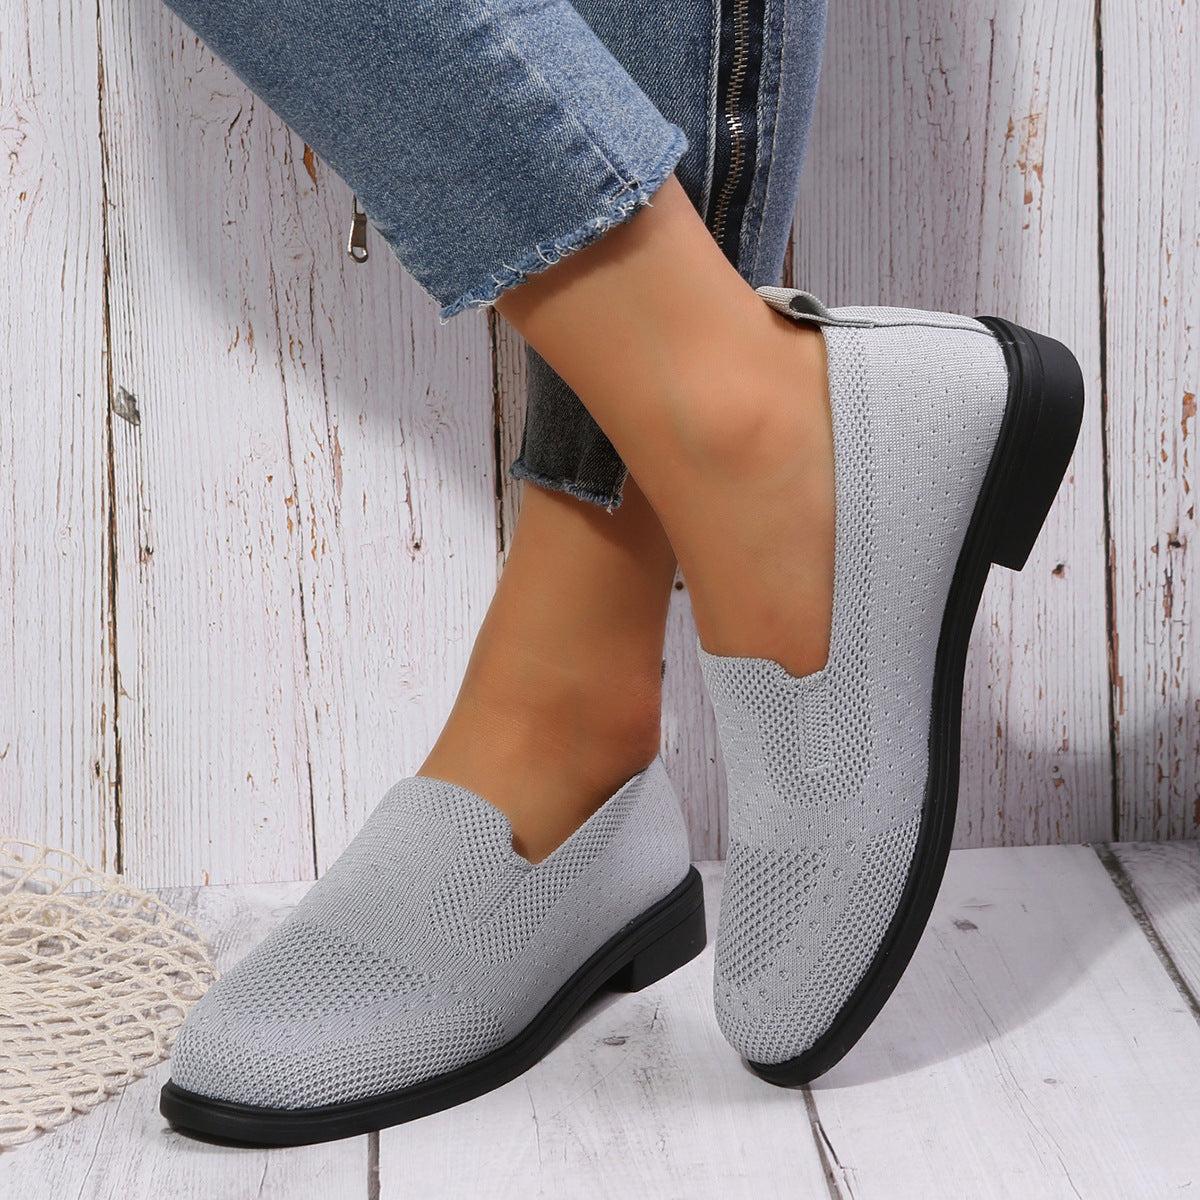 Women's flyknit slip on loafers shoes low heels breathable hollow knitted sneakers